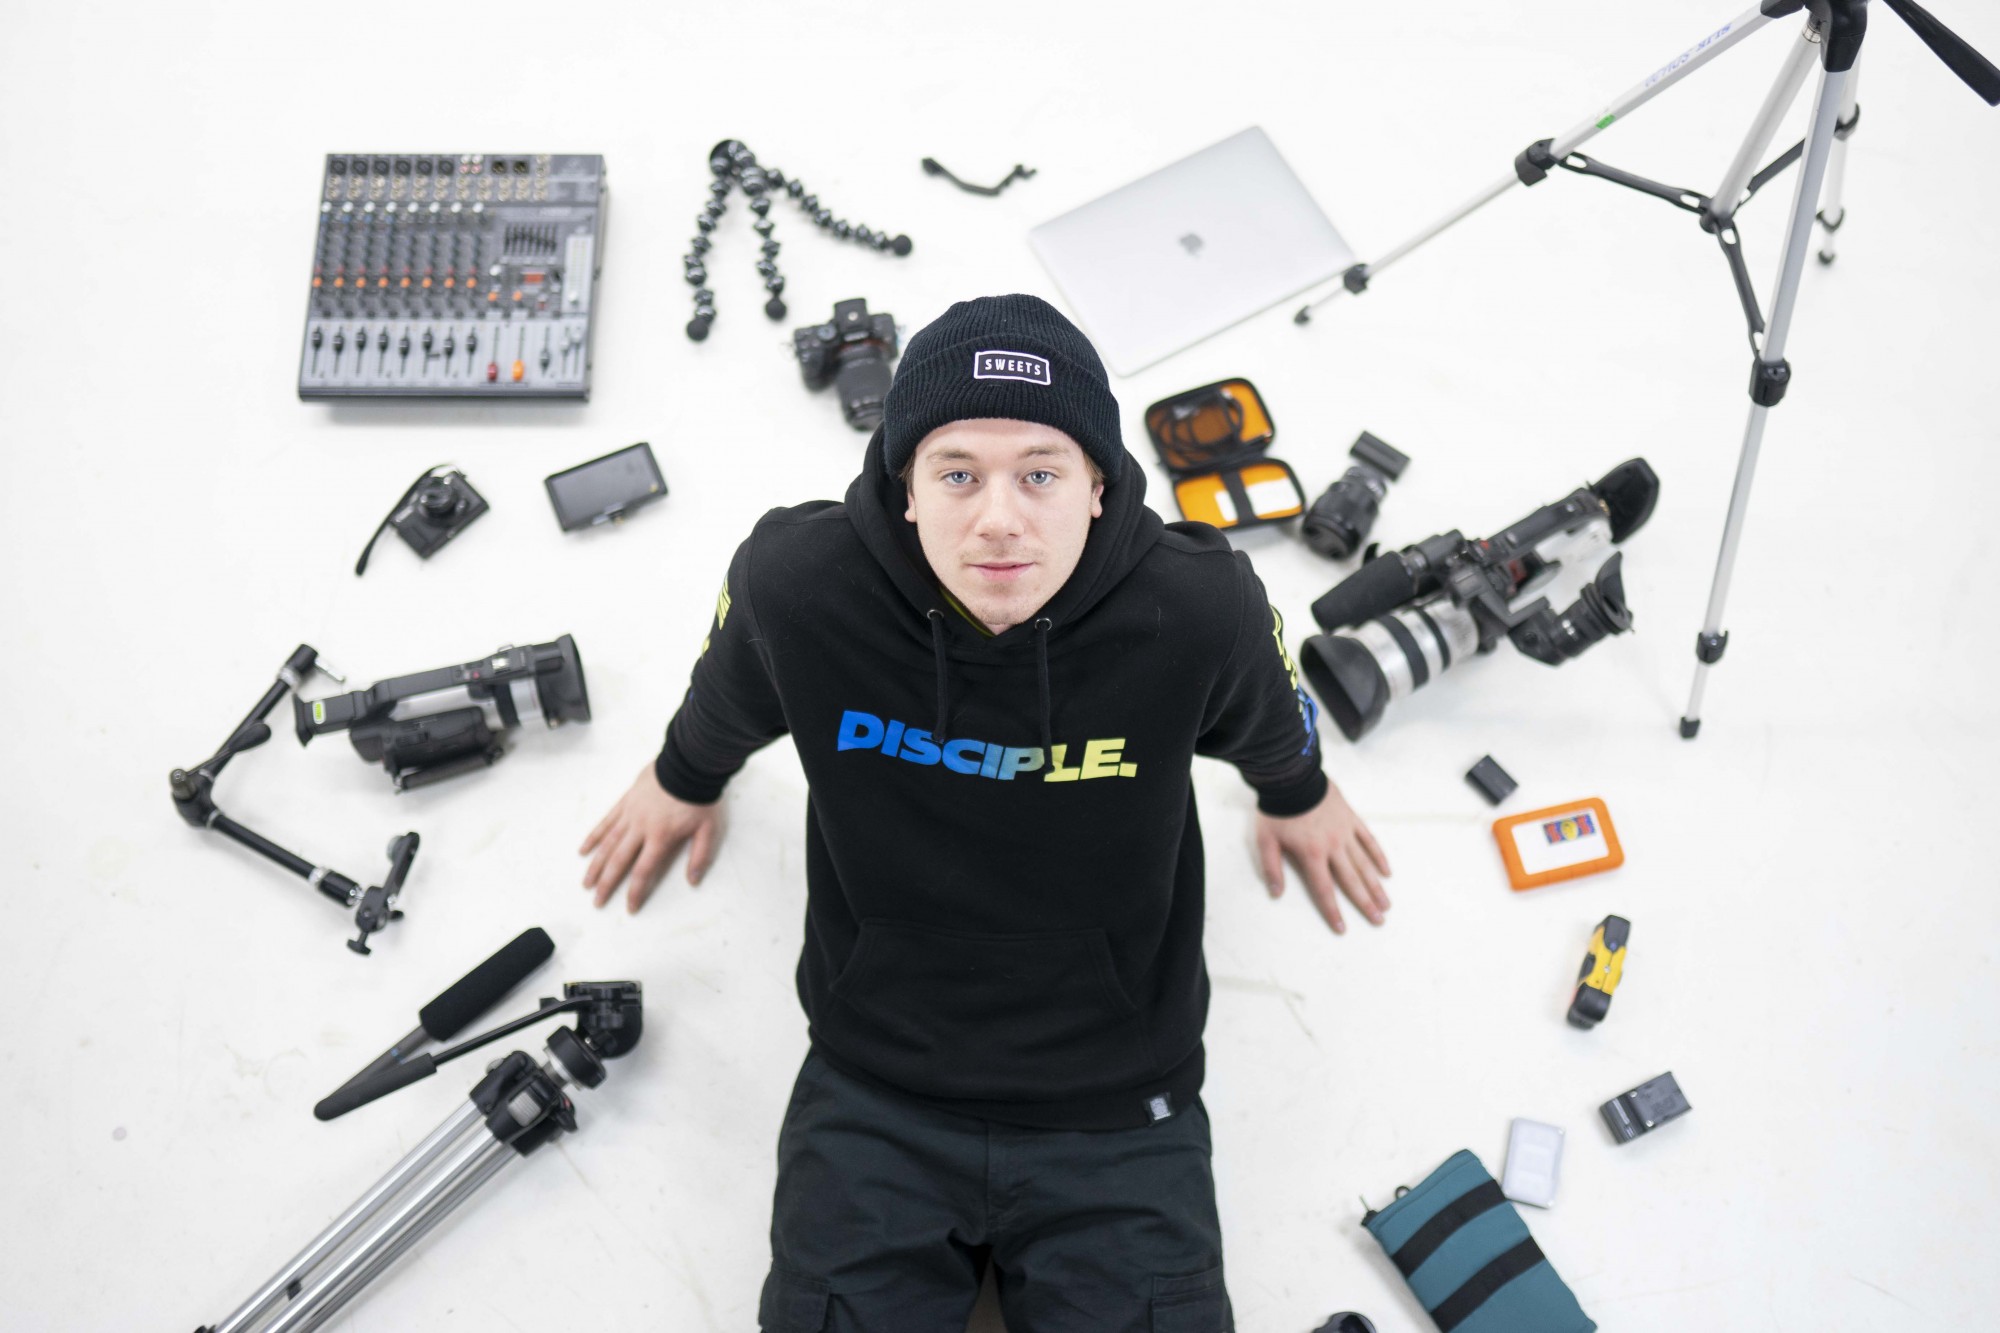 Cooper Eddy poses for a portrait with his video production equipment in his Minneapolis based Sweets Kendamas studio on Monday, Dec. 2. His job as a videographer allows him to create educational tutorials and film with other professionals on a regular basis. Eddy believes in social media as a way to connect with others who share a similar passion for Kendama. 